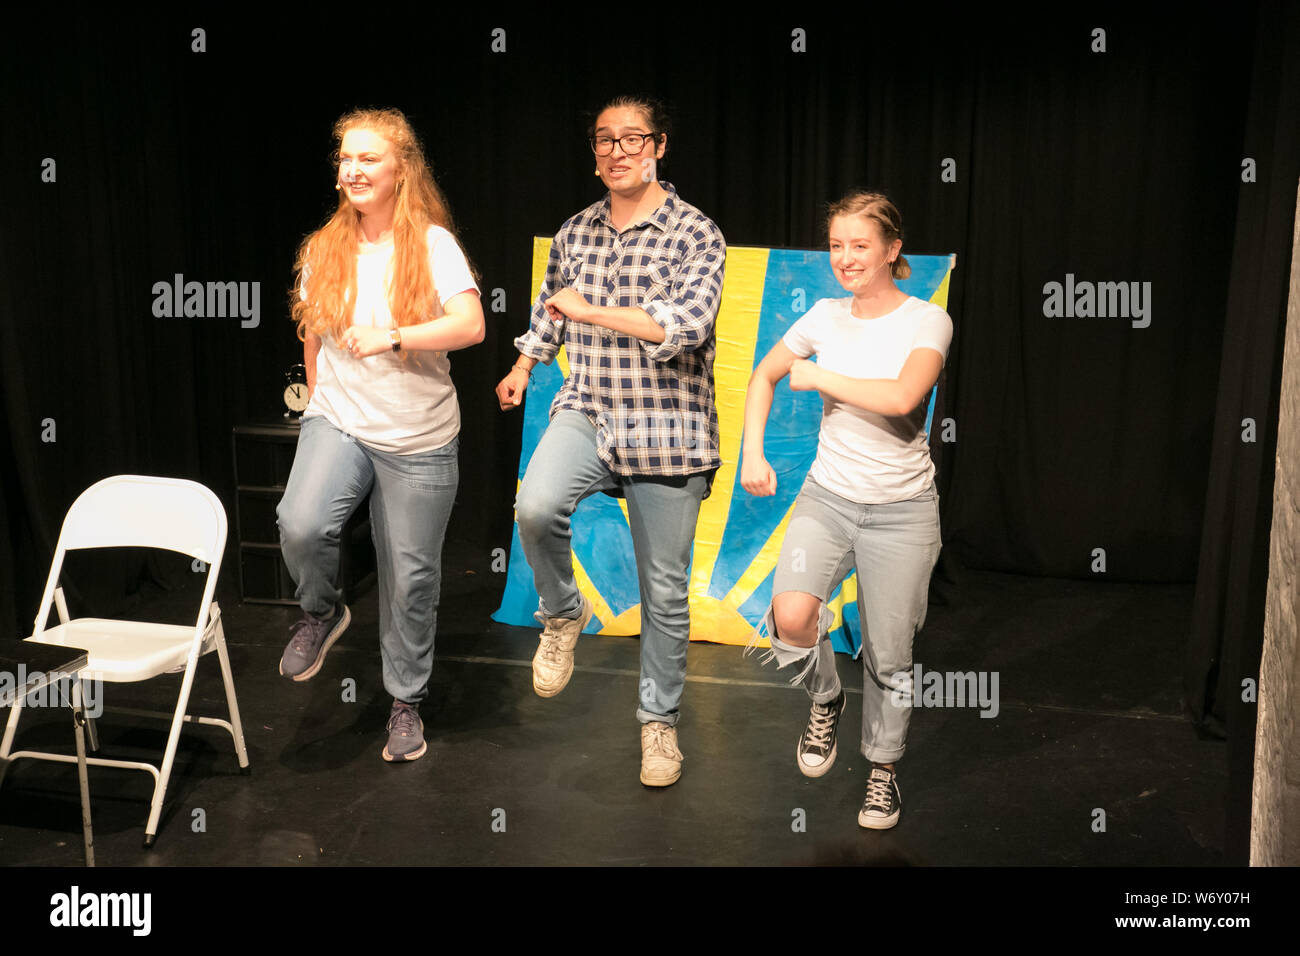 Edinburgh, Scotland, 3rd, August, 2019. Pictured L-R, Emily Peach, Yitzin R Lopez, Natalie Davies, performing Early Mornings - The Musical.  Credit: Brian Wilson/Alamy Live News. Stock Photo